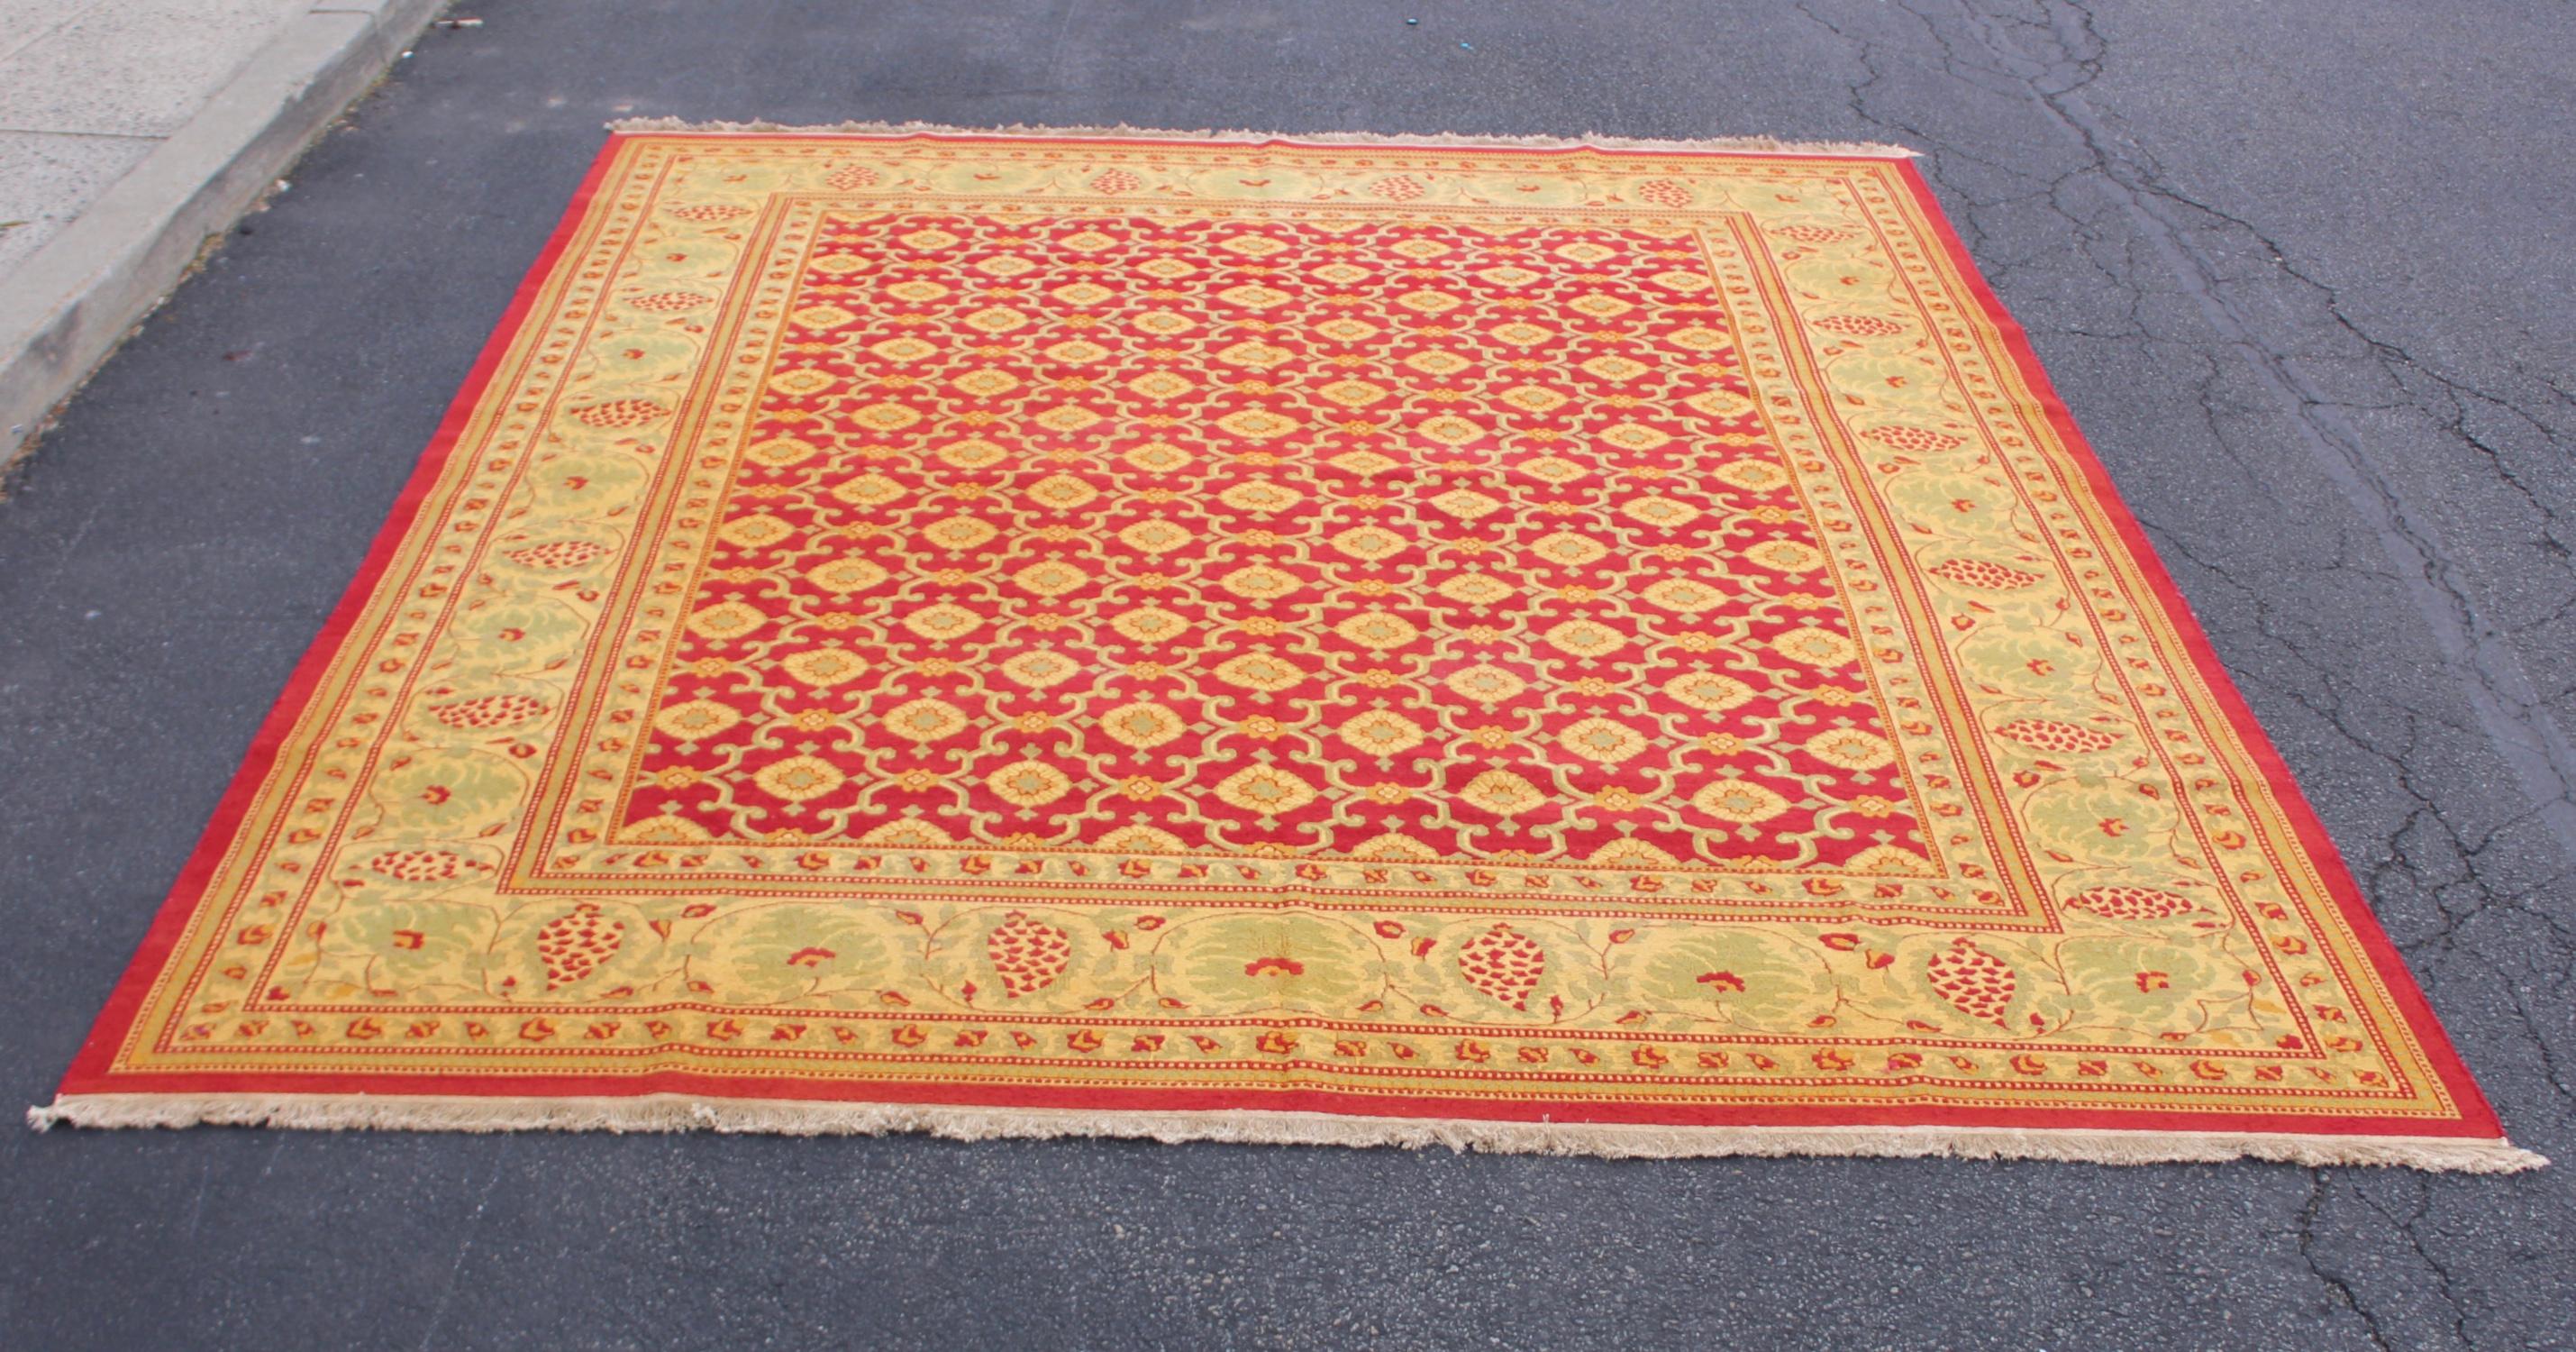 Indian 1940s Art Deco Oversize Rug from India